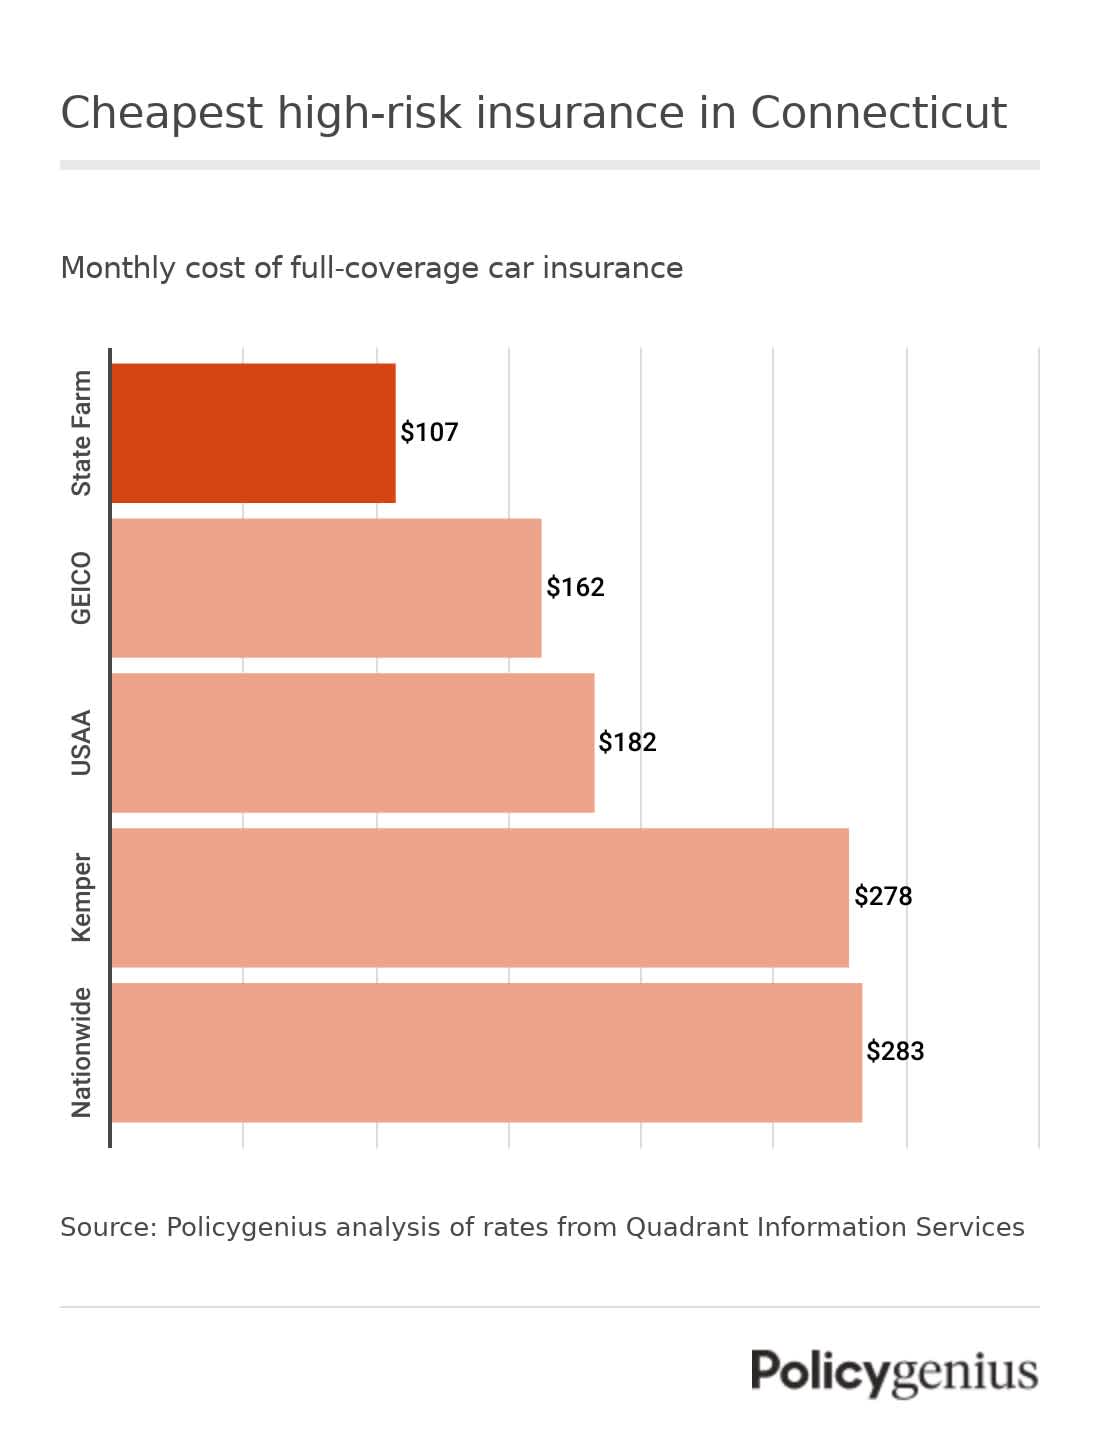 A bar graph showing the cheapest high-risk insurance in Connecticut. State Farm has the lowest rates.